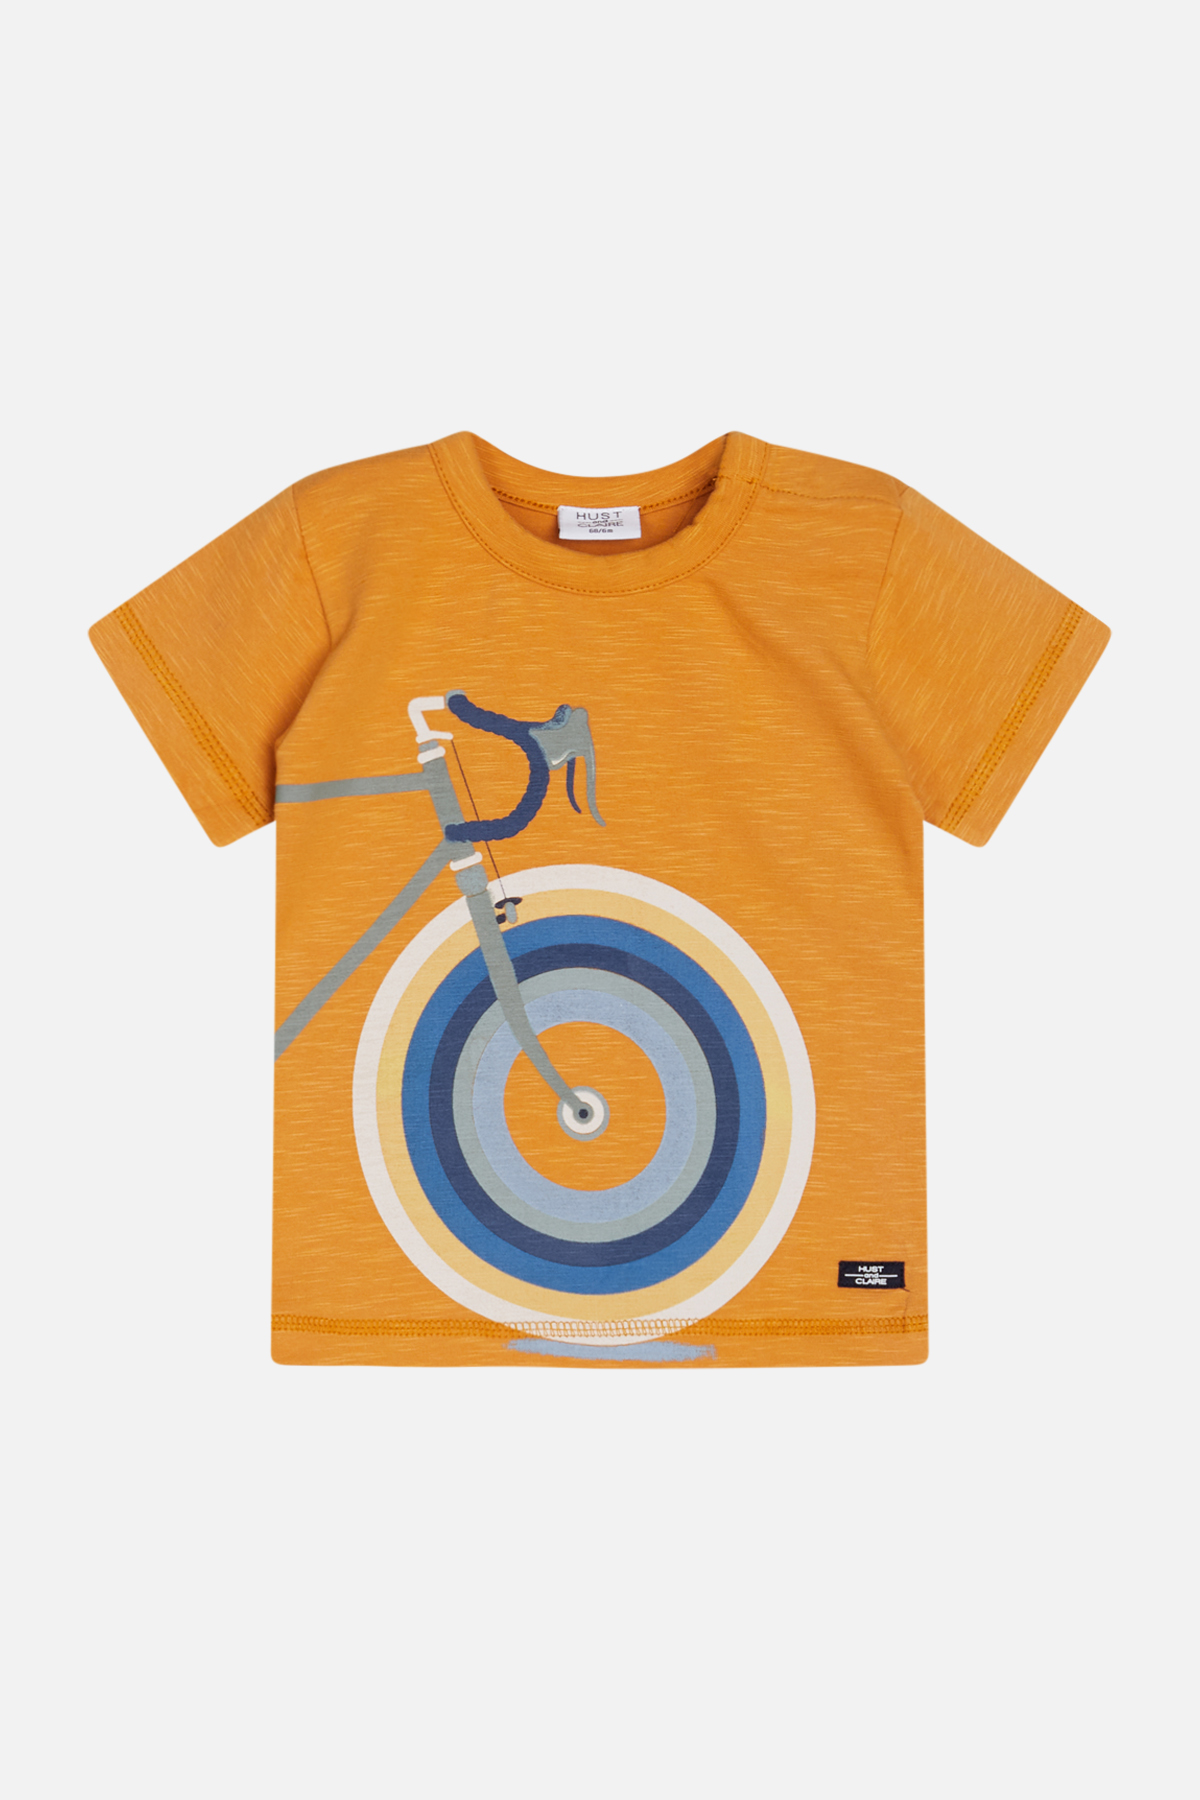 T-Shirt gelb Hust and Claire Fahrrad